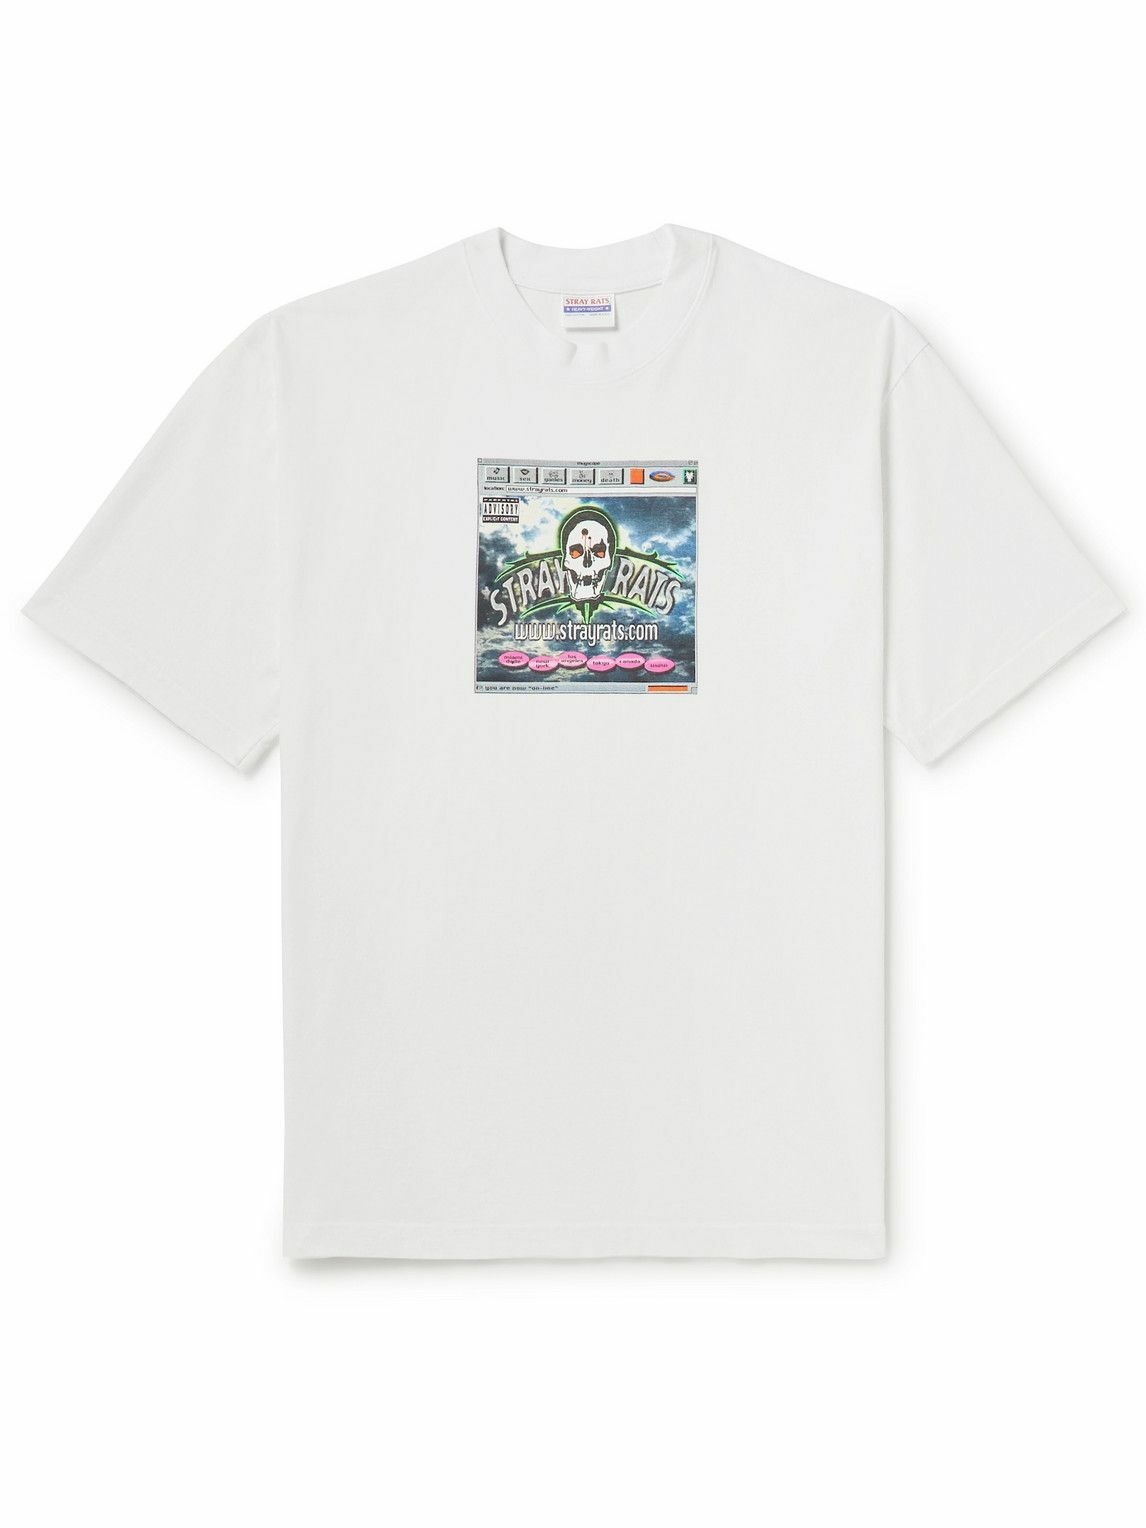 Stray Rats - Browser Printed Cotton-Jersey T-Shirt - White